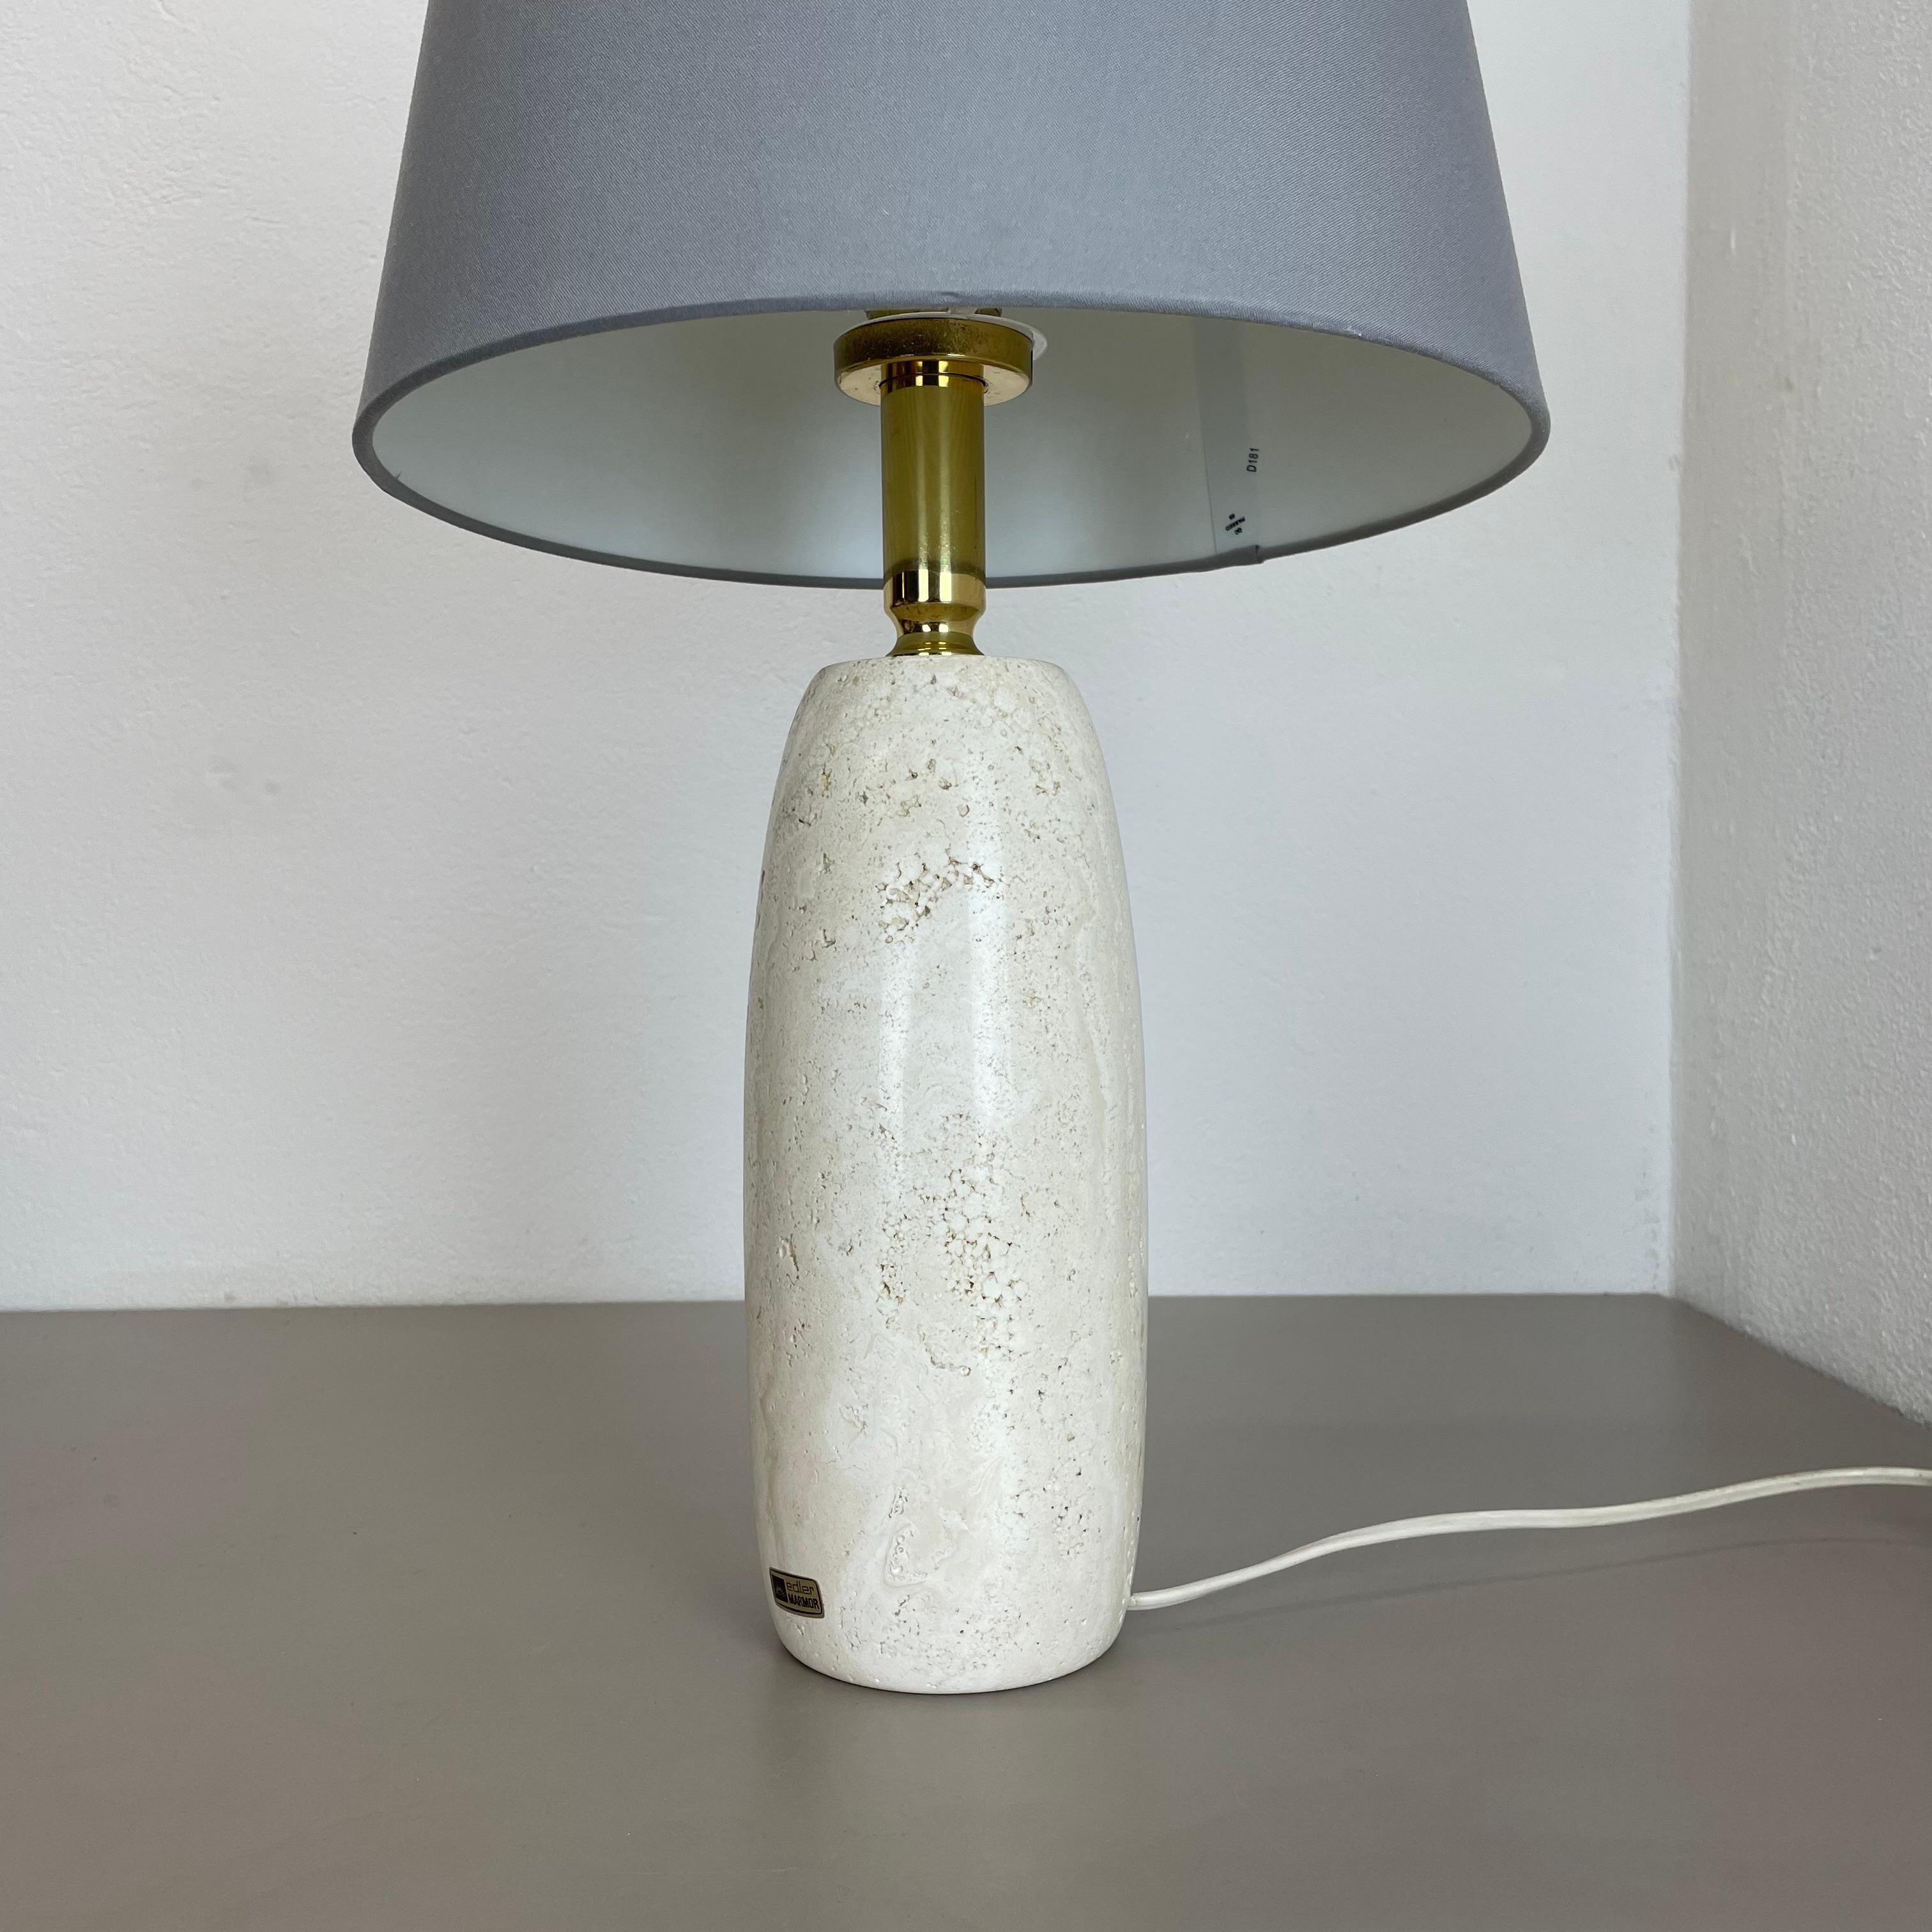 6.4kg Travertine Marble Fratelli Mannelli Style Table Light Base, Italy, 1970s In Good Condition For Sale In Kirchlengern, DE